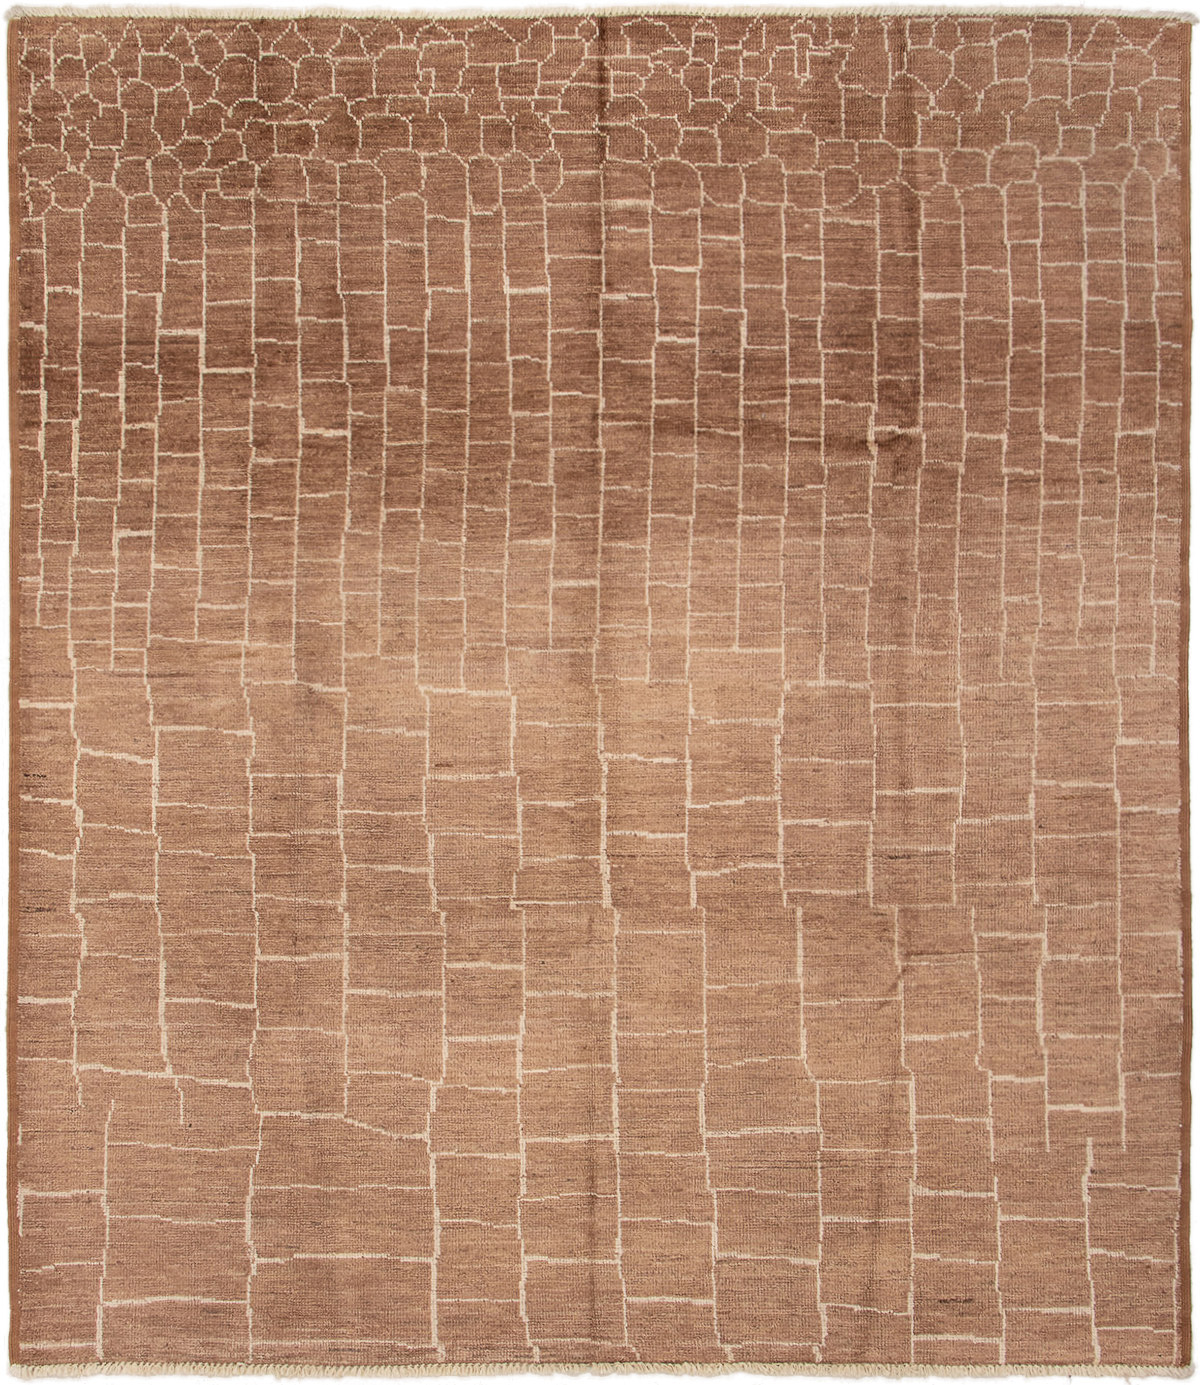 Hand-knotted Tangier Brown Wool Rug 8'3" x 9'6" Size: 8'3" x 9'6"  